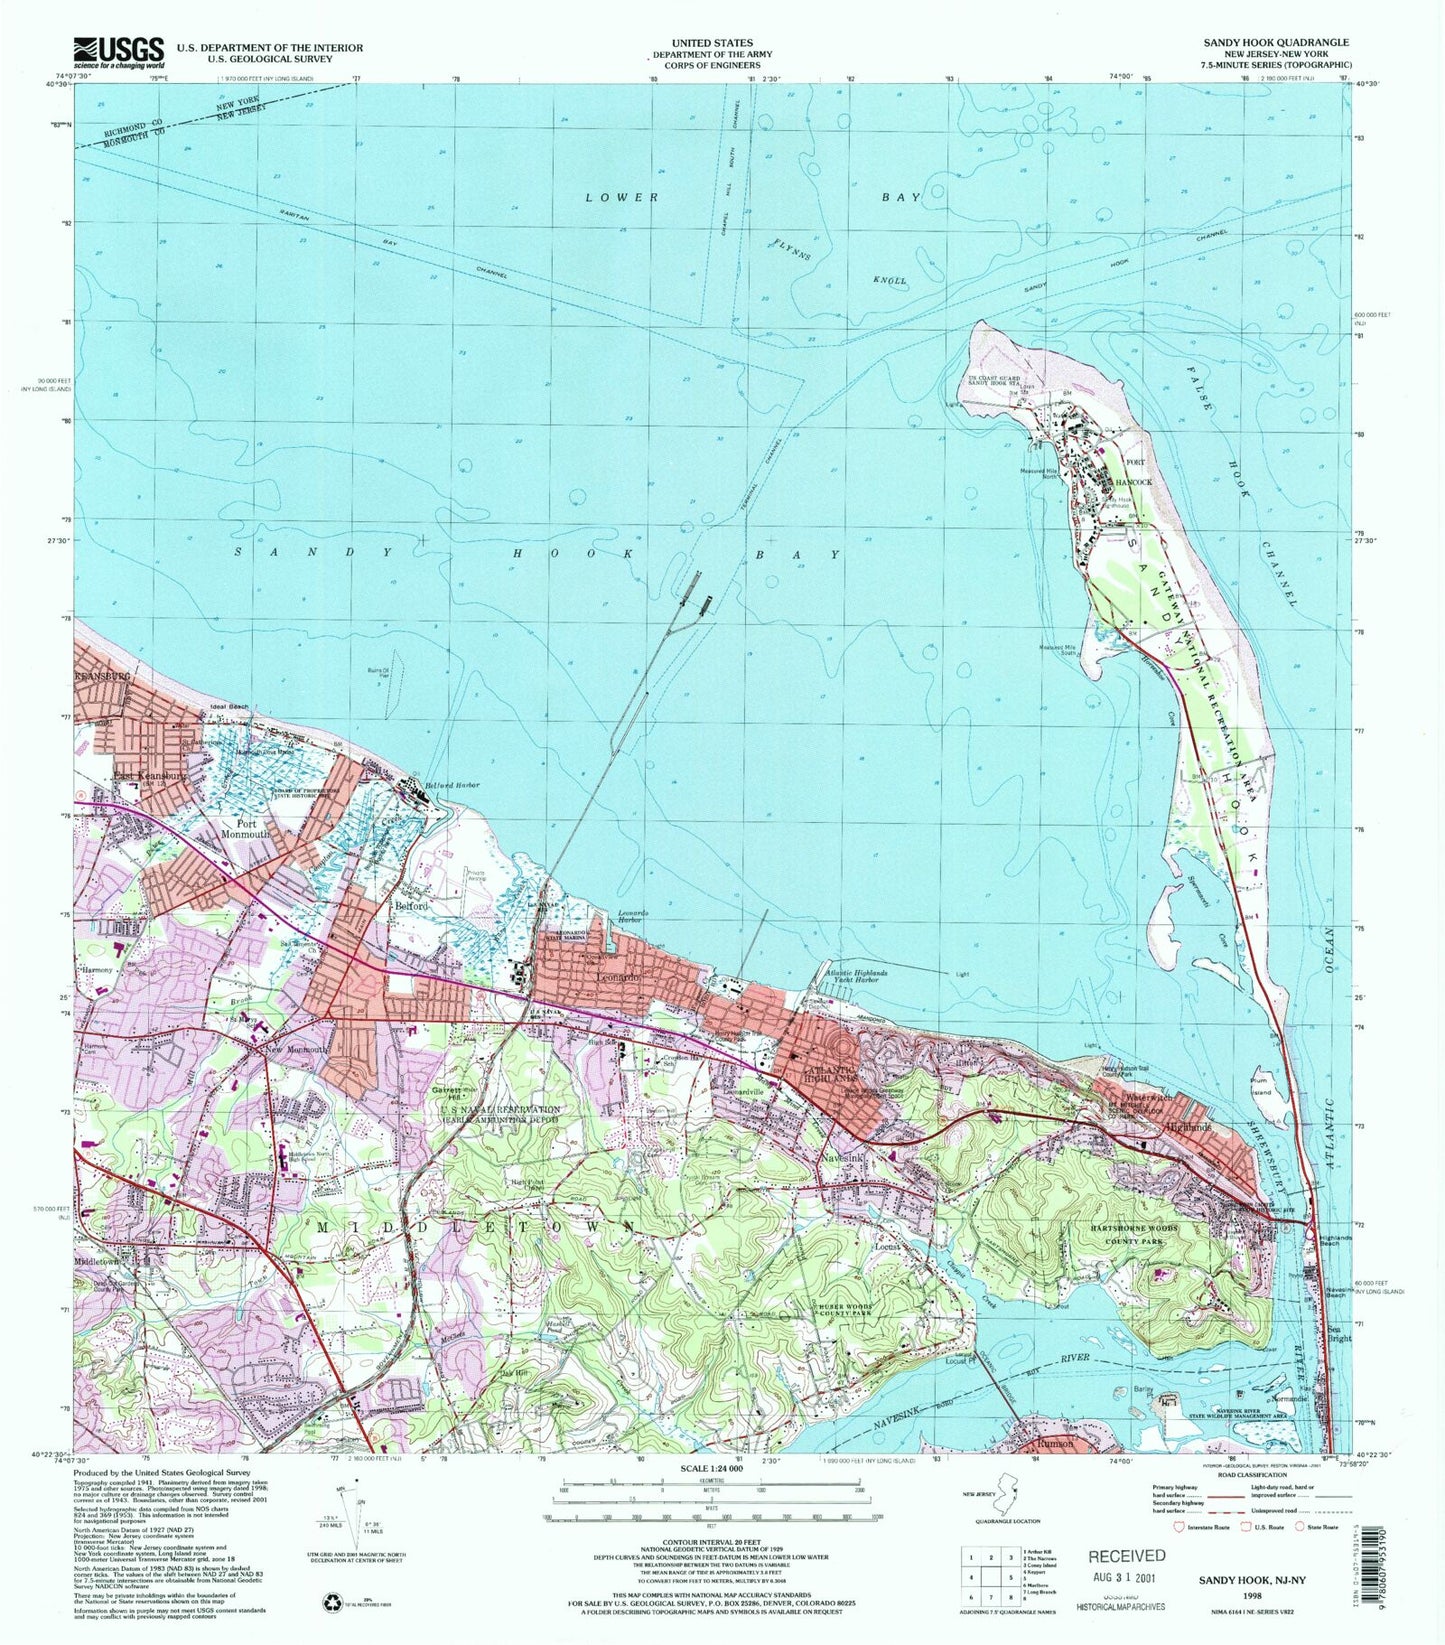 Classic USGS Sandy Hook New Jersey 7.5'x7.5' Topo Map Image